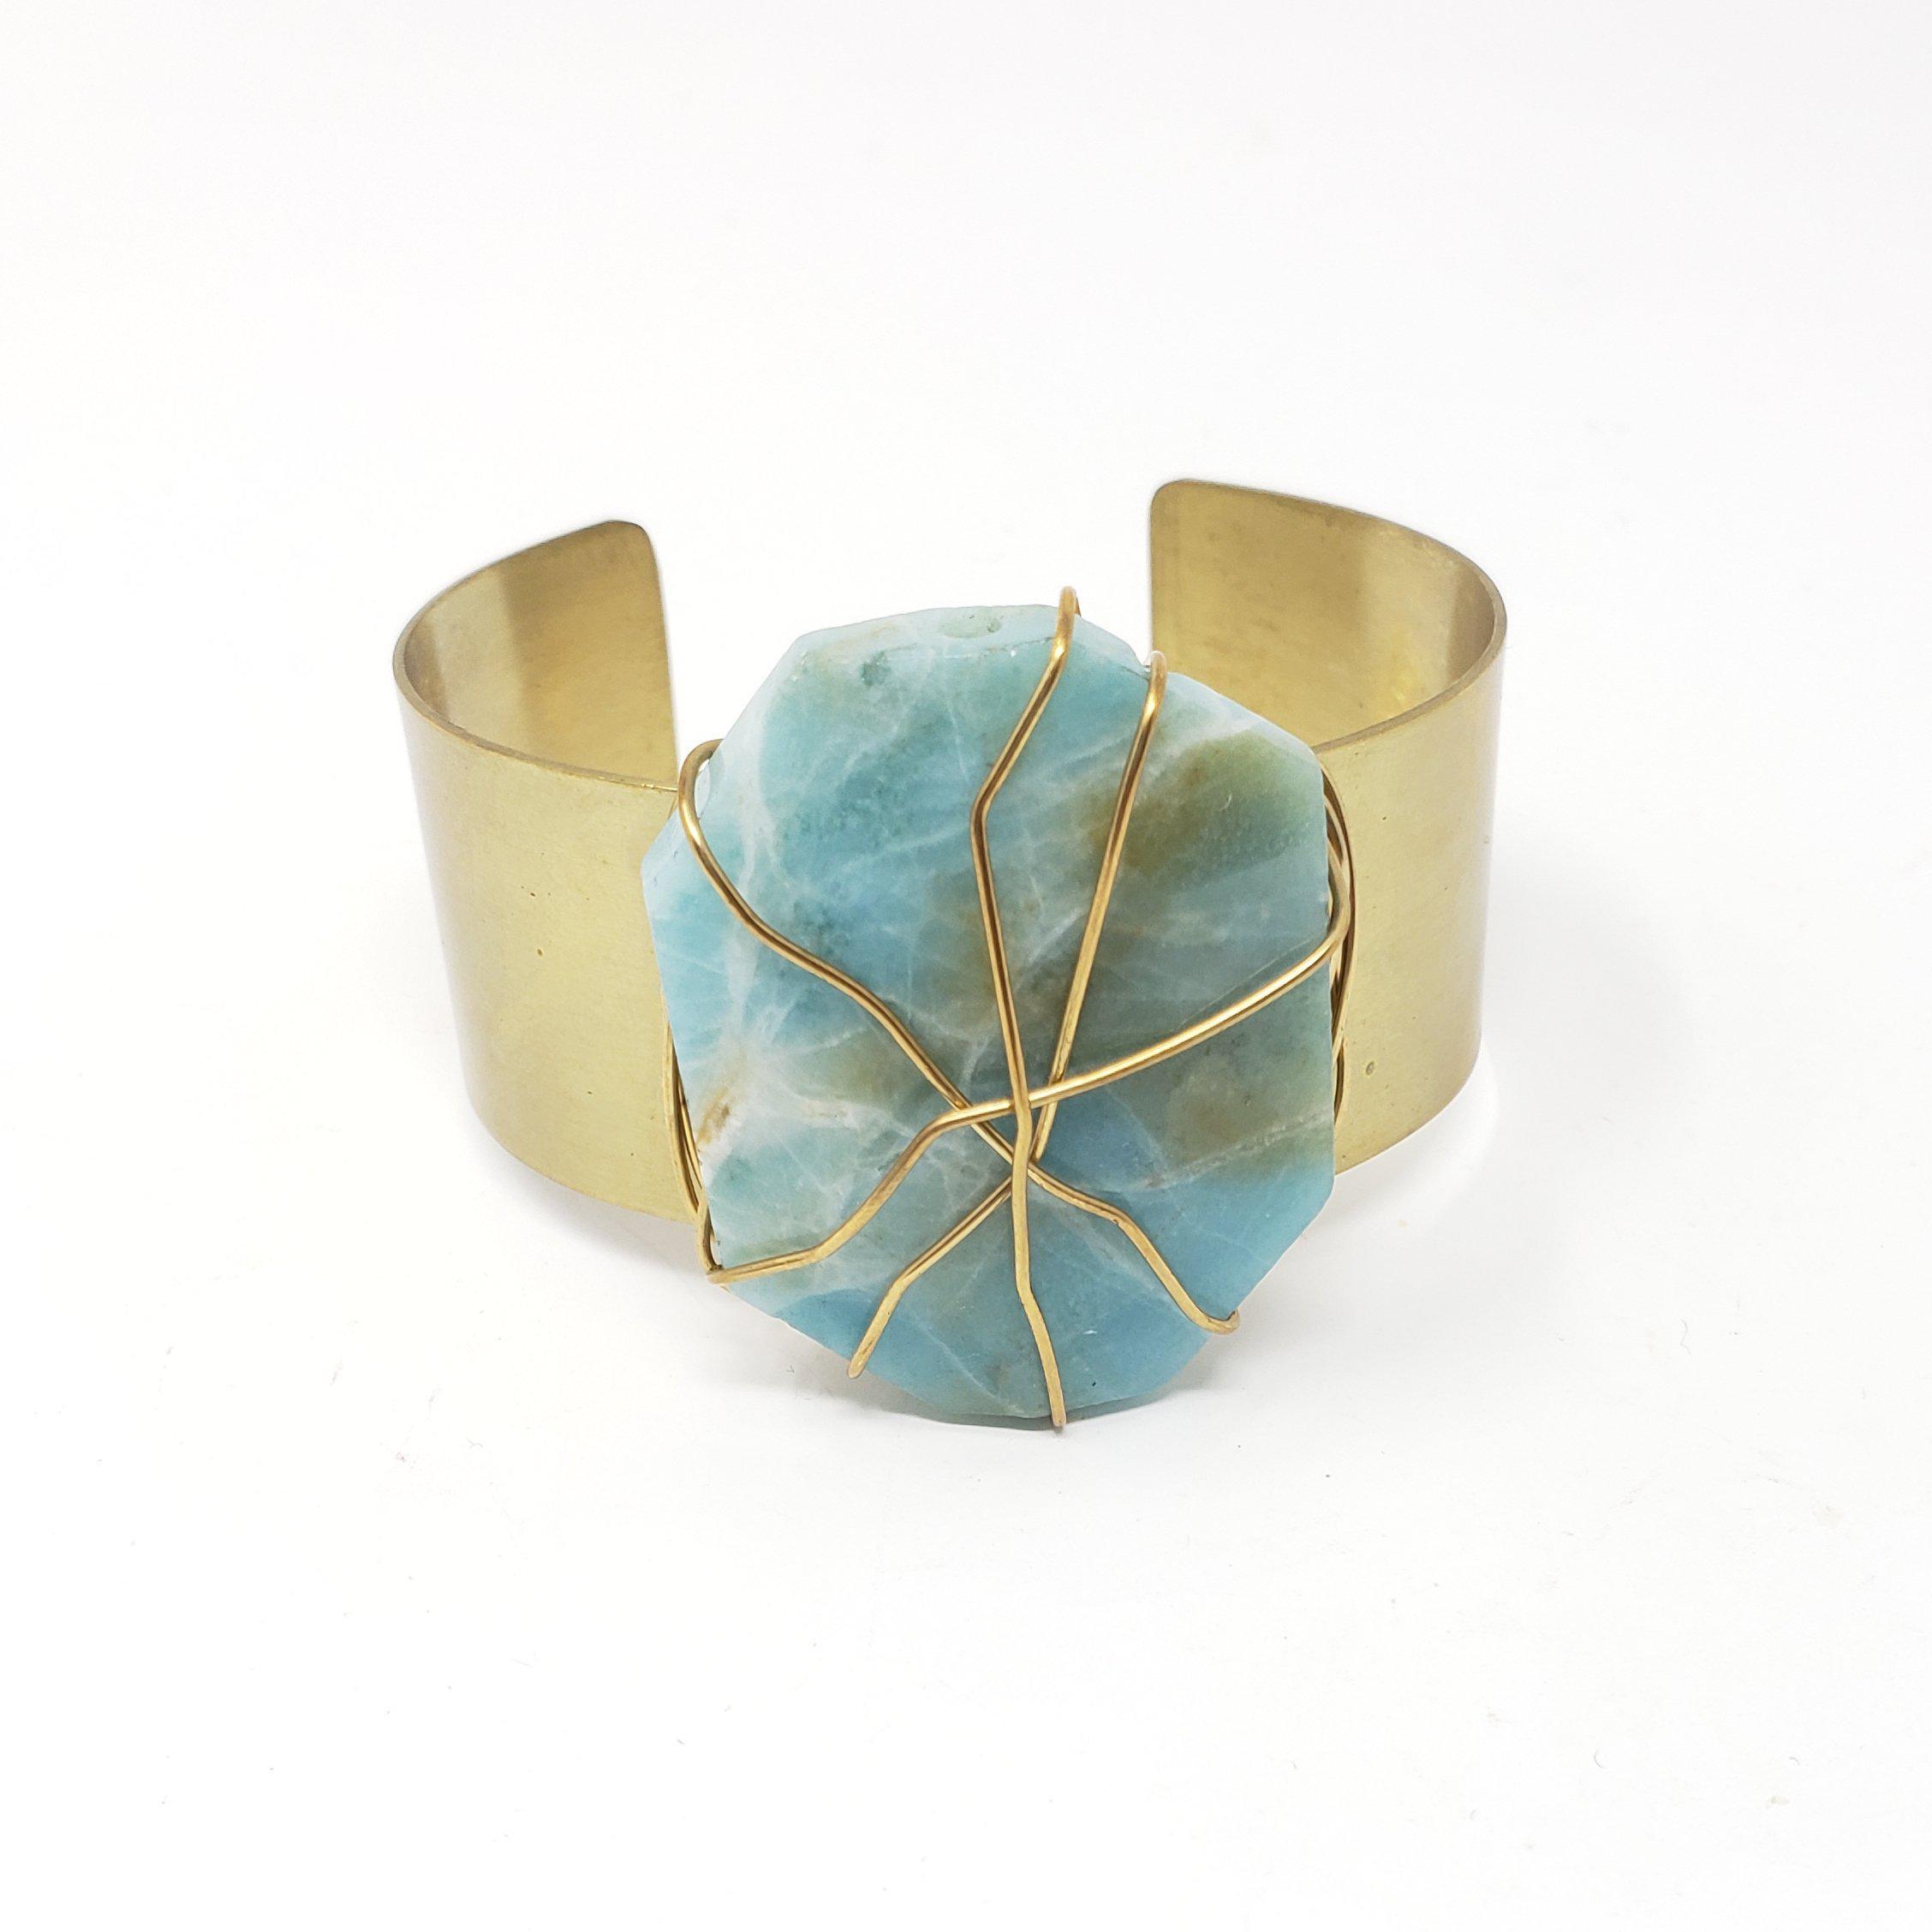 Bone Amazonite Necklace and Recycled Brass Cuff